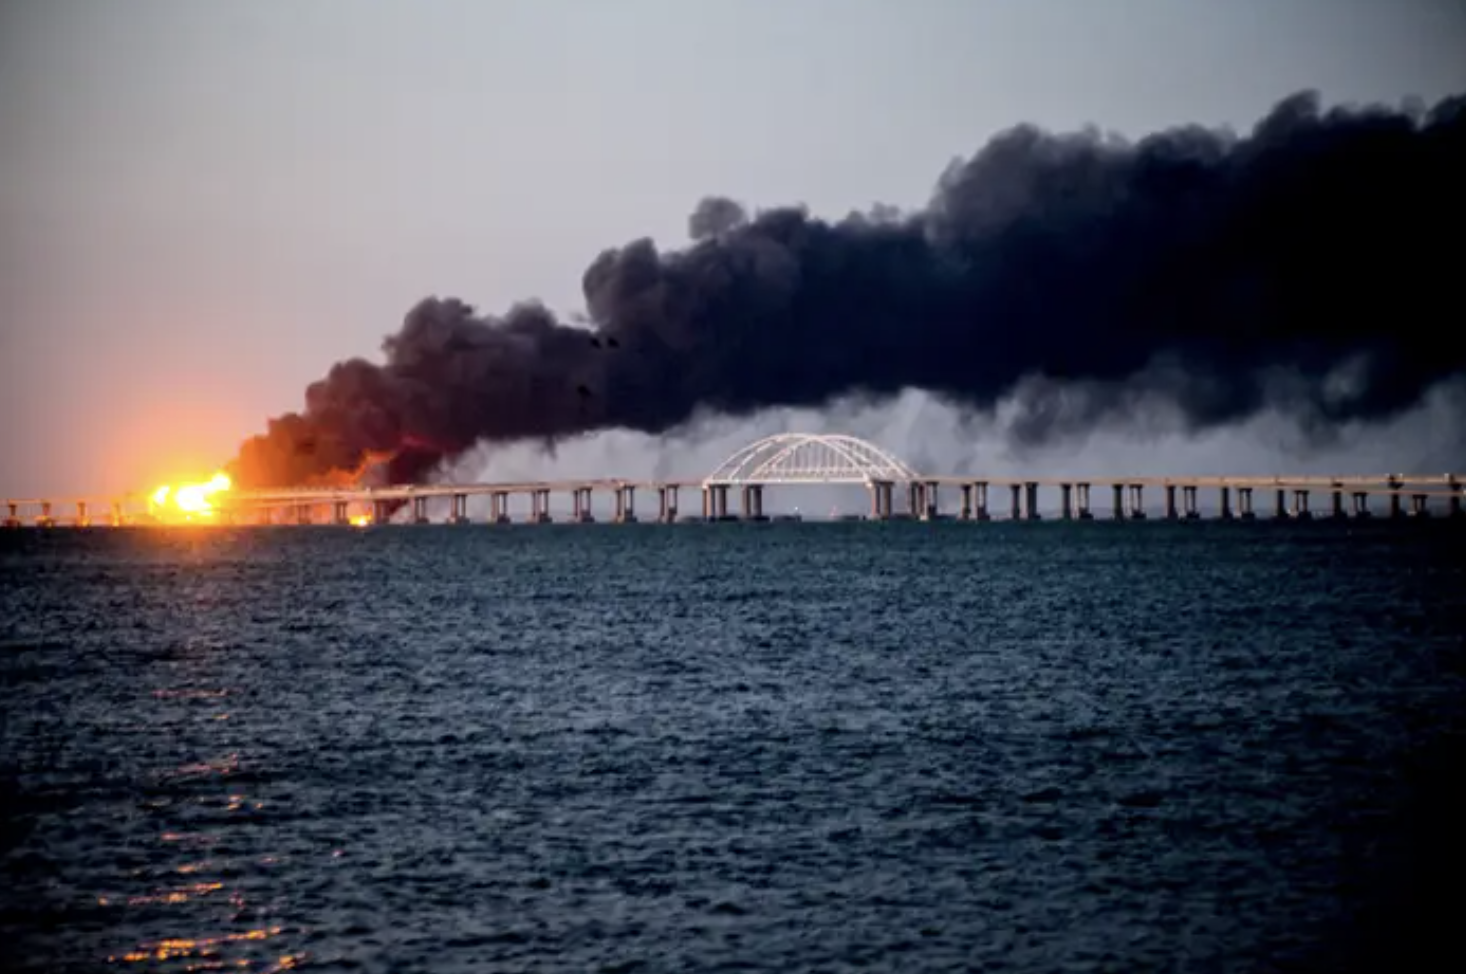 A bridge over water on fire and smoking